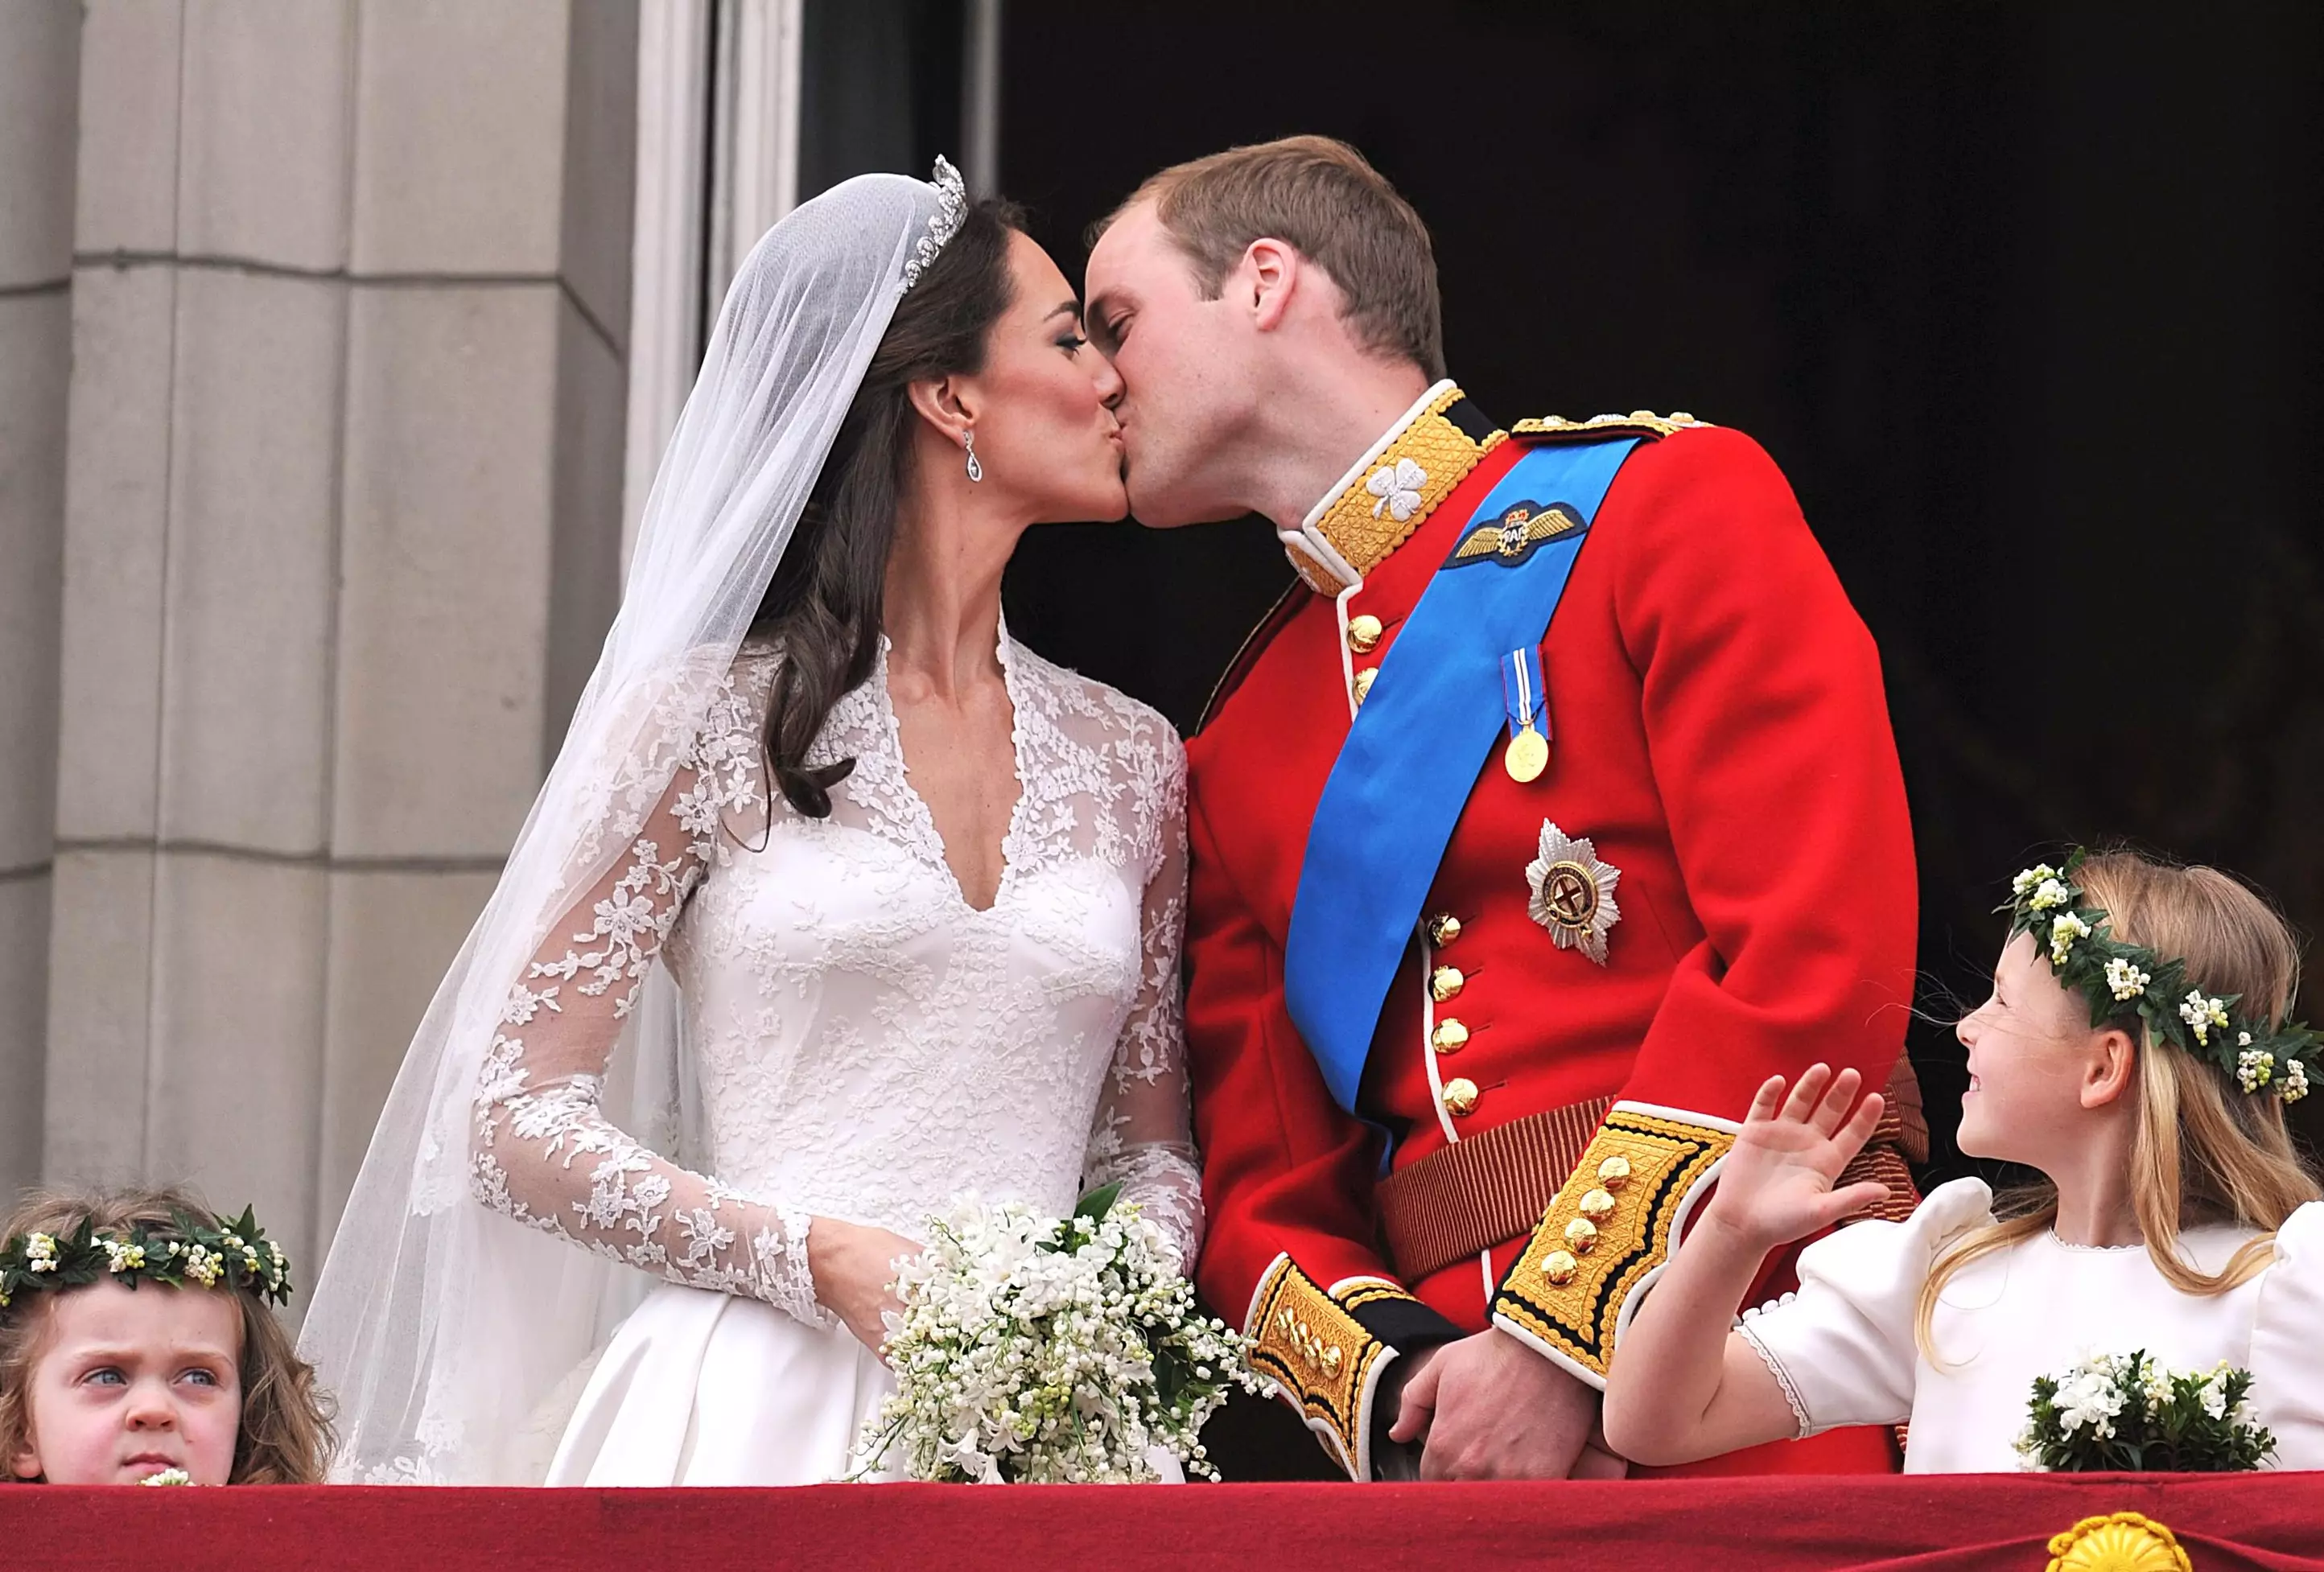 The pair married 10 years ago today, while the world watched (